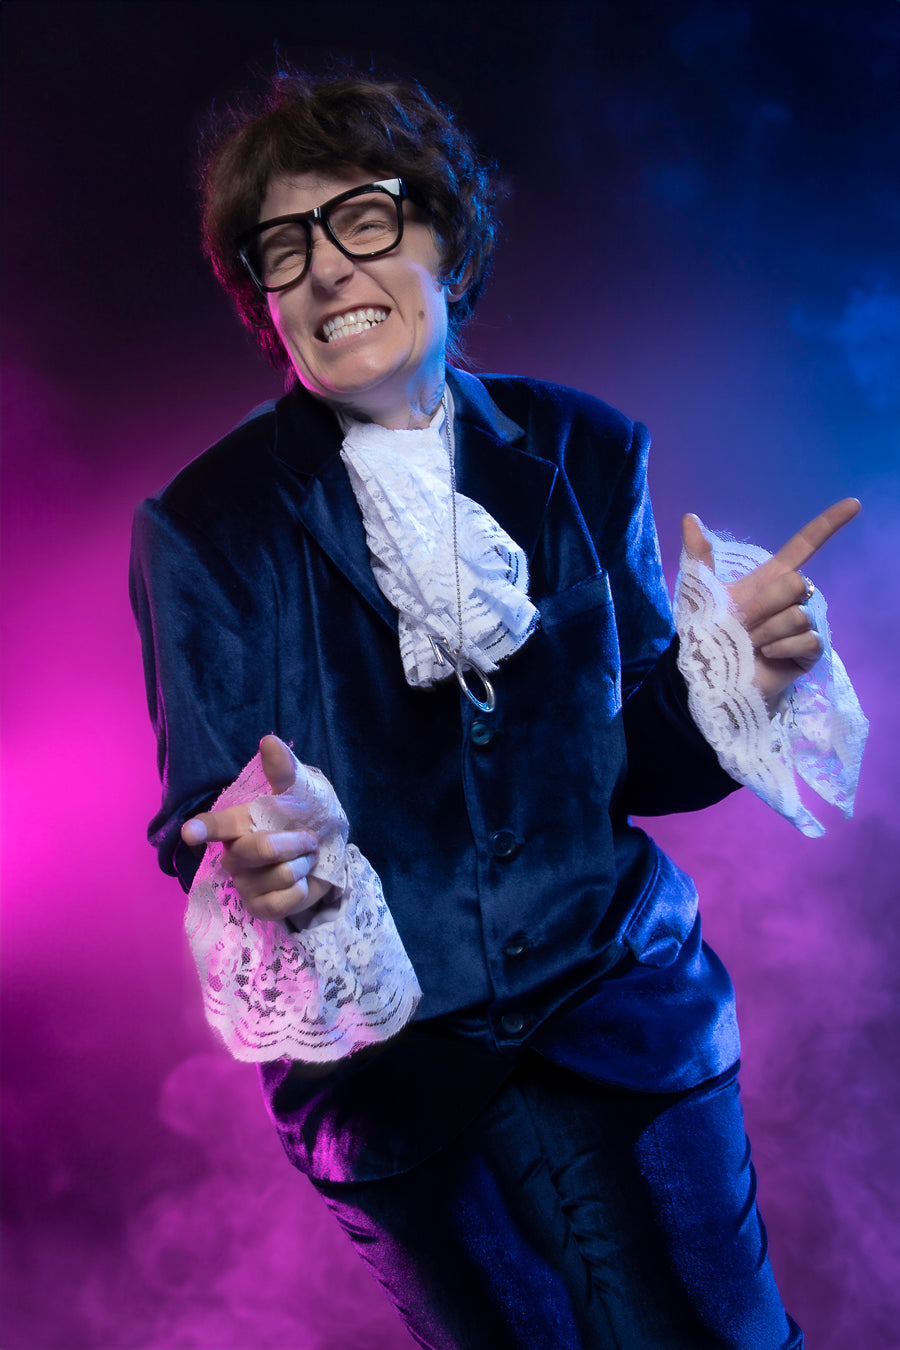 Austin Powers Costume Hire or Cosplay, plus Makeup and Photography. Proudly by and available at, Little Shop of Horrors Costumery Mornington & Melbourne